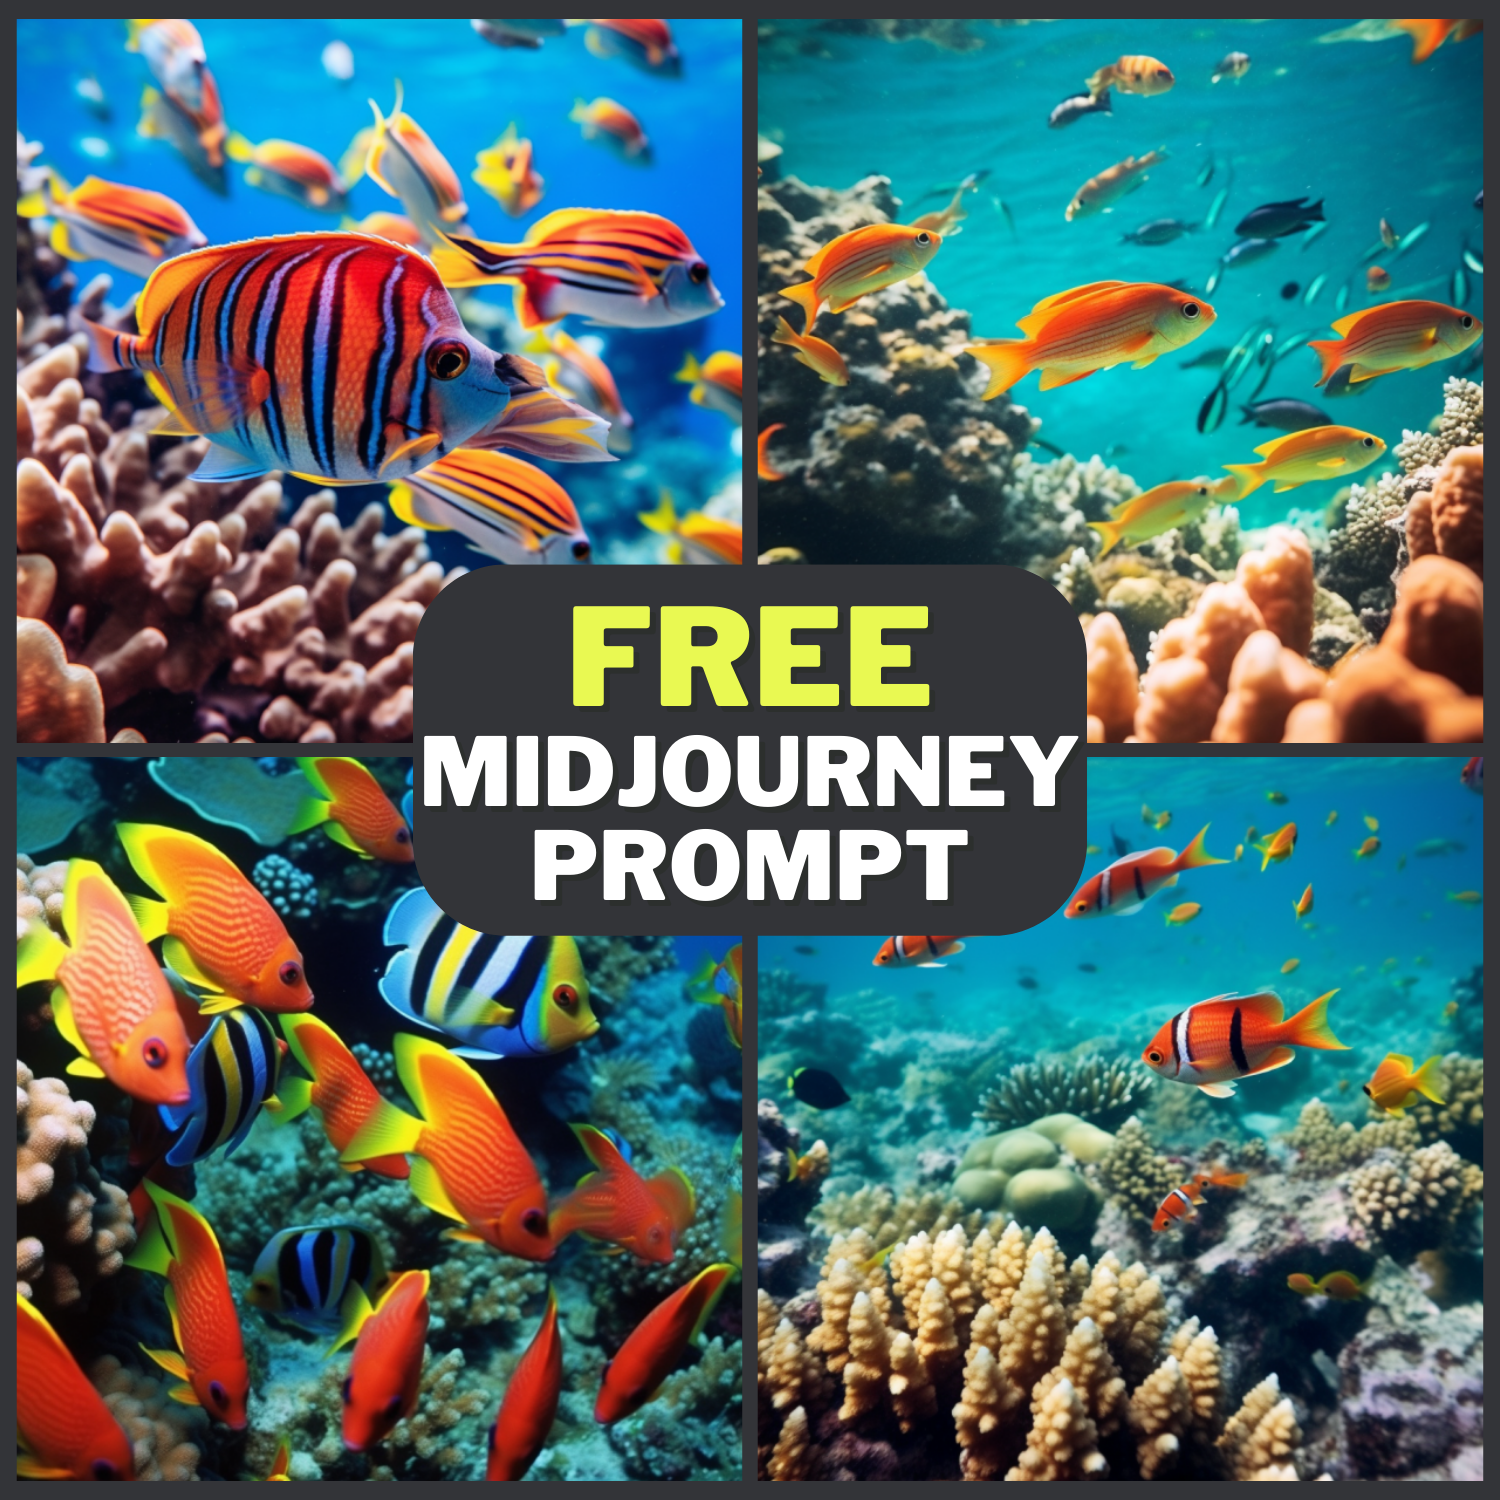 Barrier Reef and Fish Free Midjourney Prompt 1